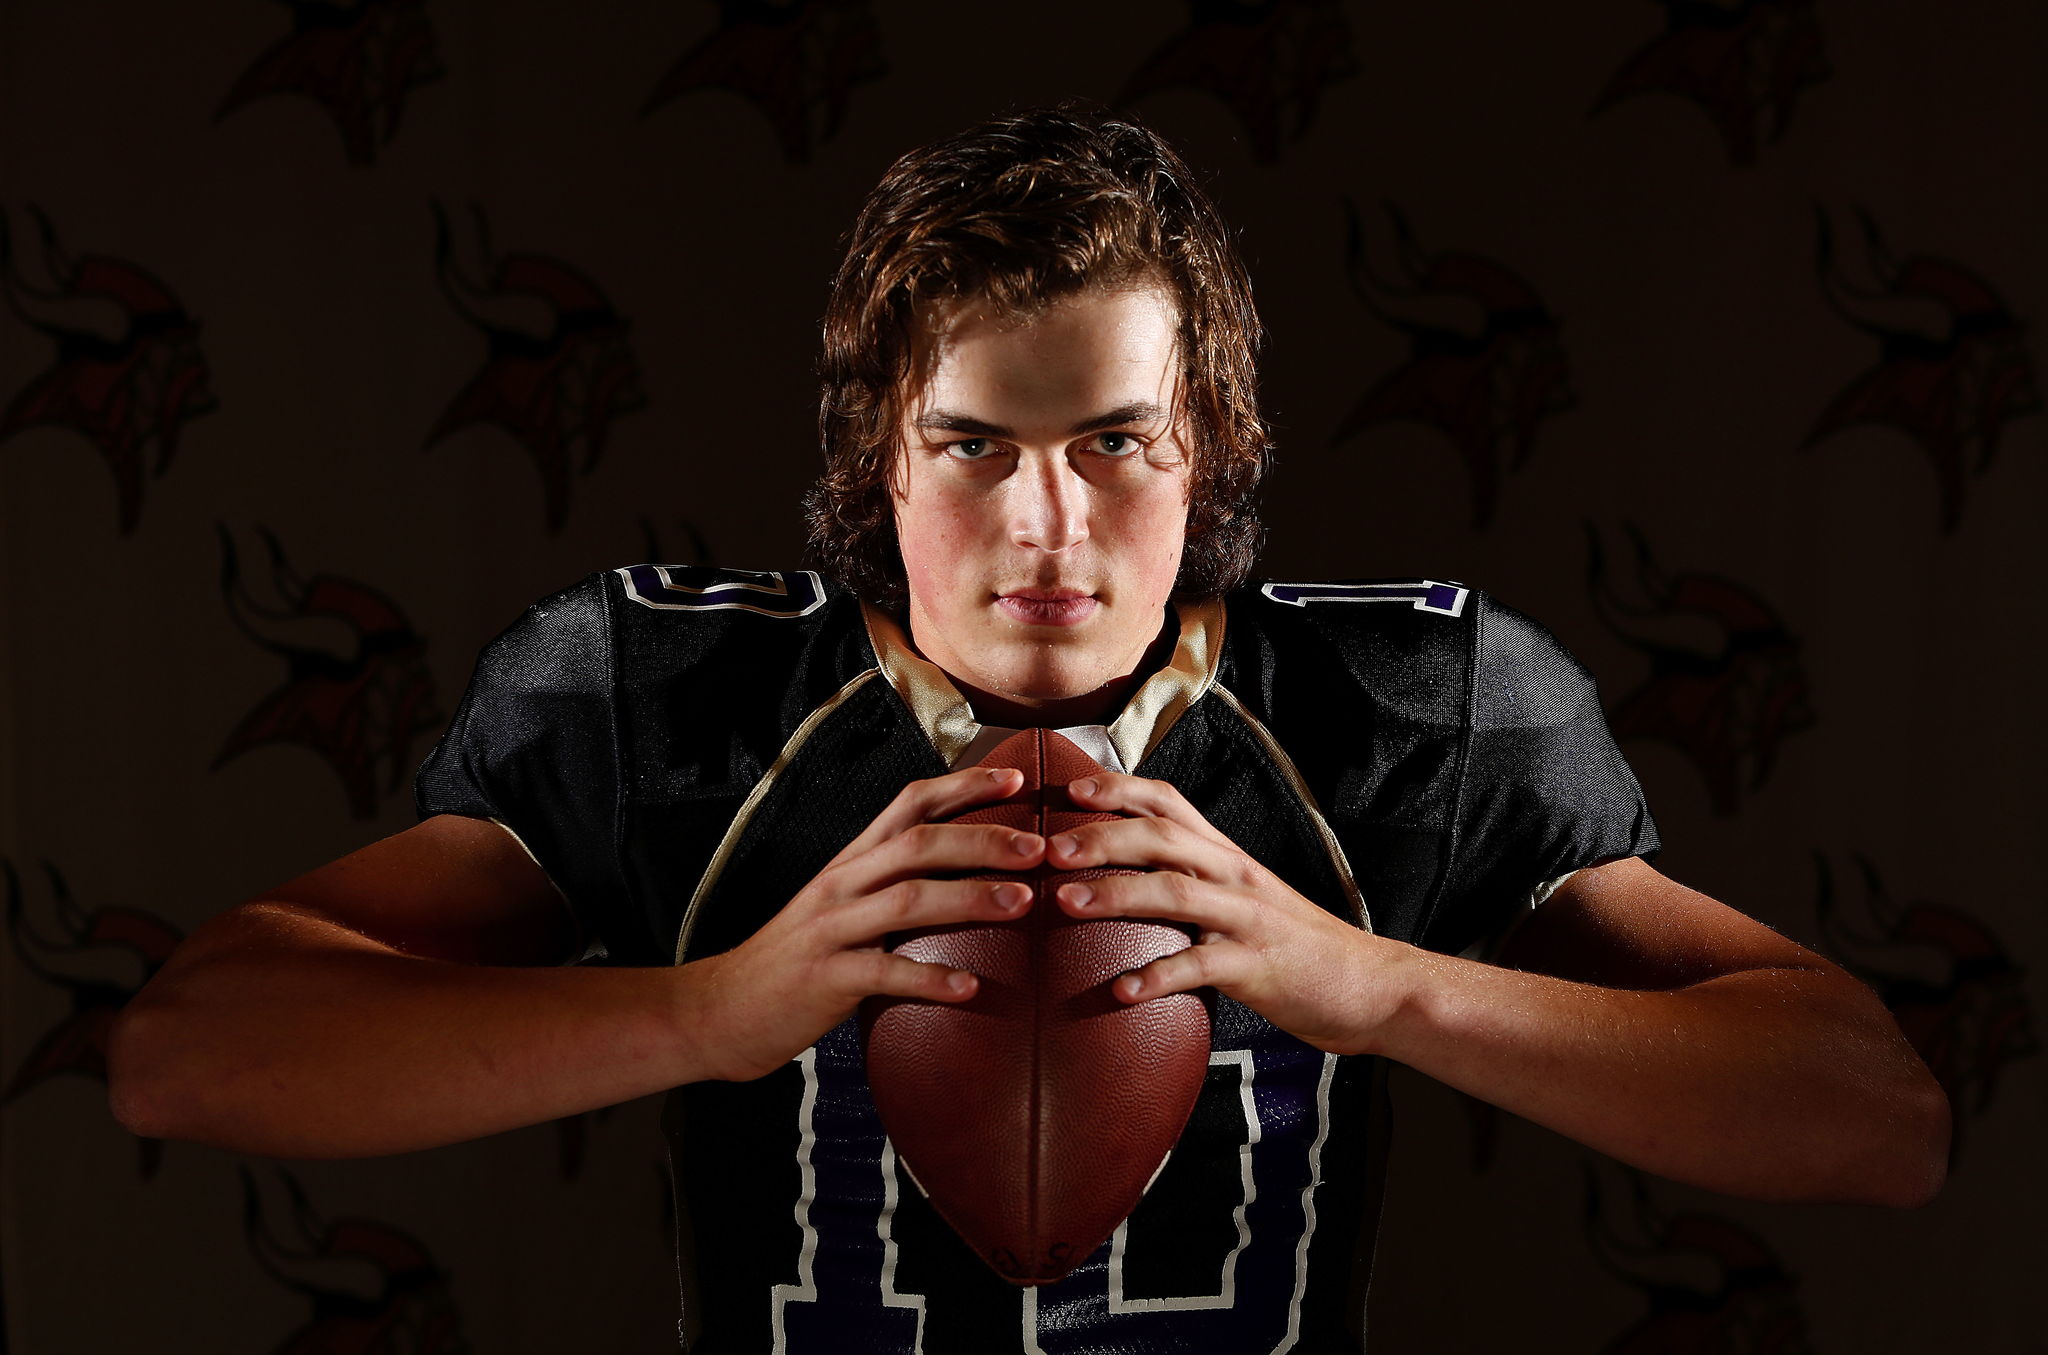 Former Lake Stevens quarterback Jason Eason, currently enrolled at the University of Georgia, is The Herald’s 2016 Boys High School Athlete of the Year.